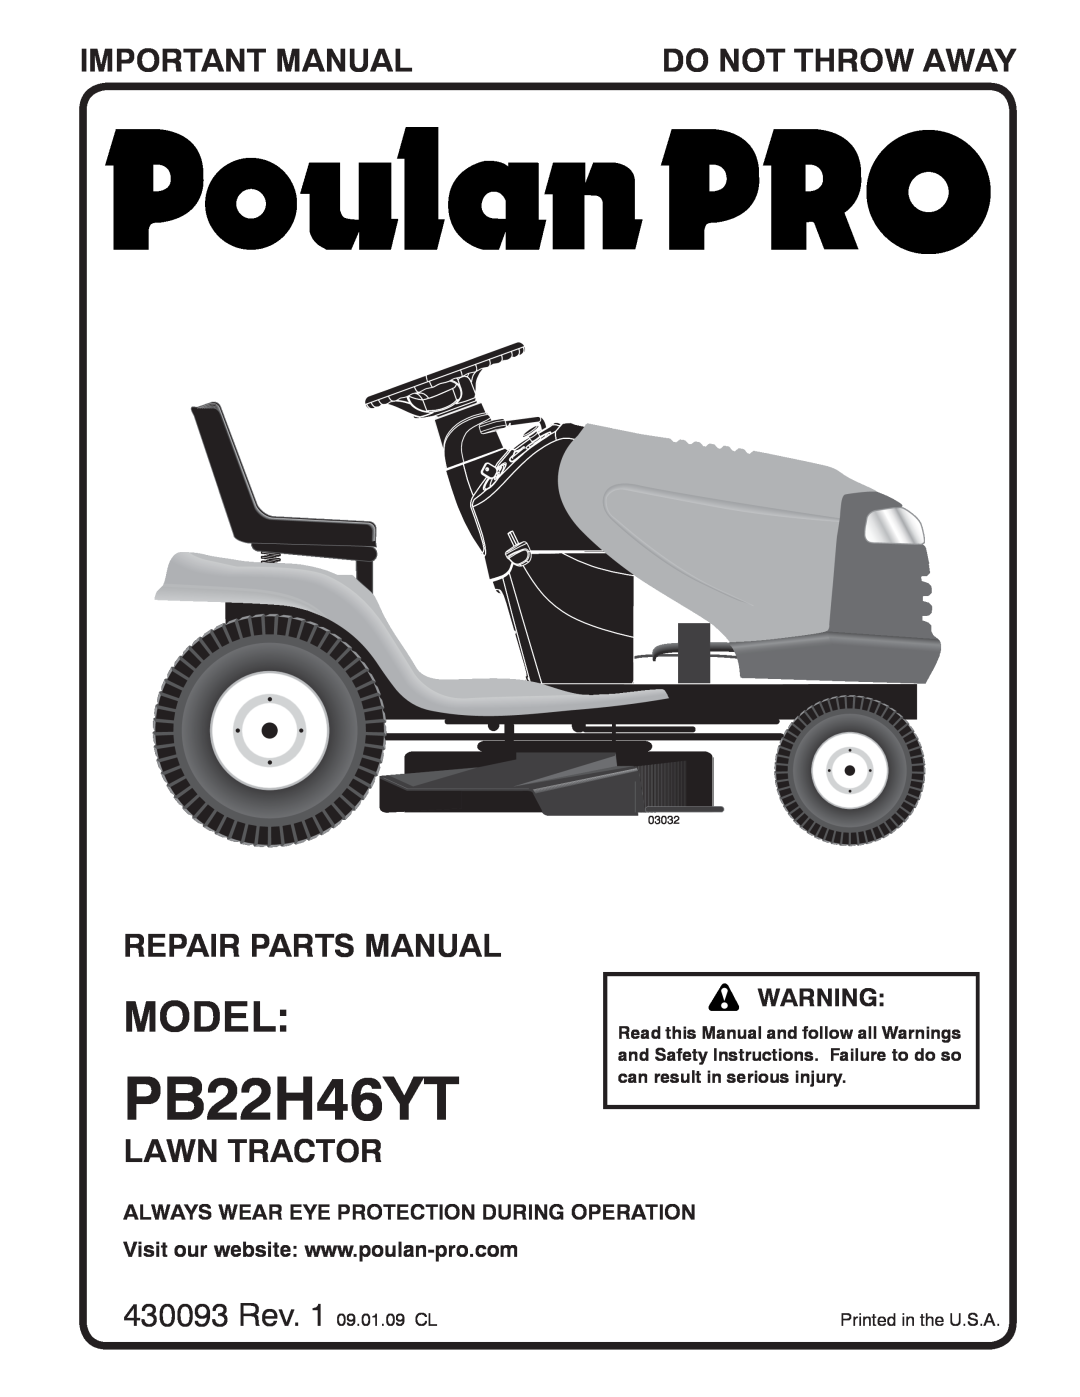 Poulan PB22H46YT warranty Model, Important Manual, Do Not Throw Away, Operator’S Manual, Lawn Tractor, 532 44 16-44Rev 